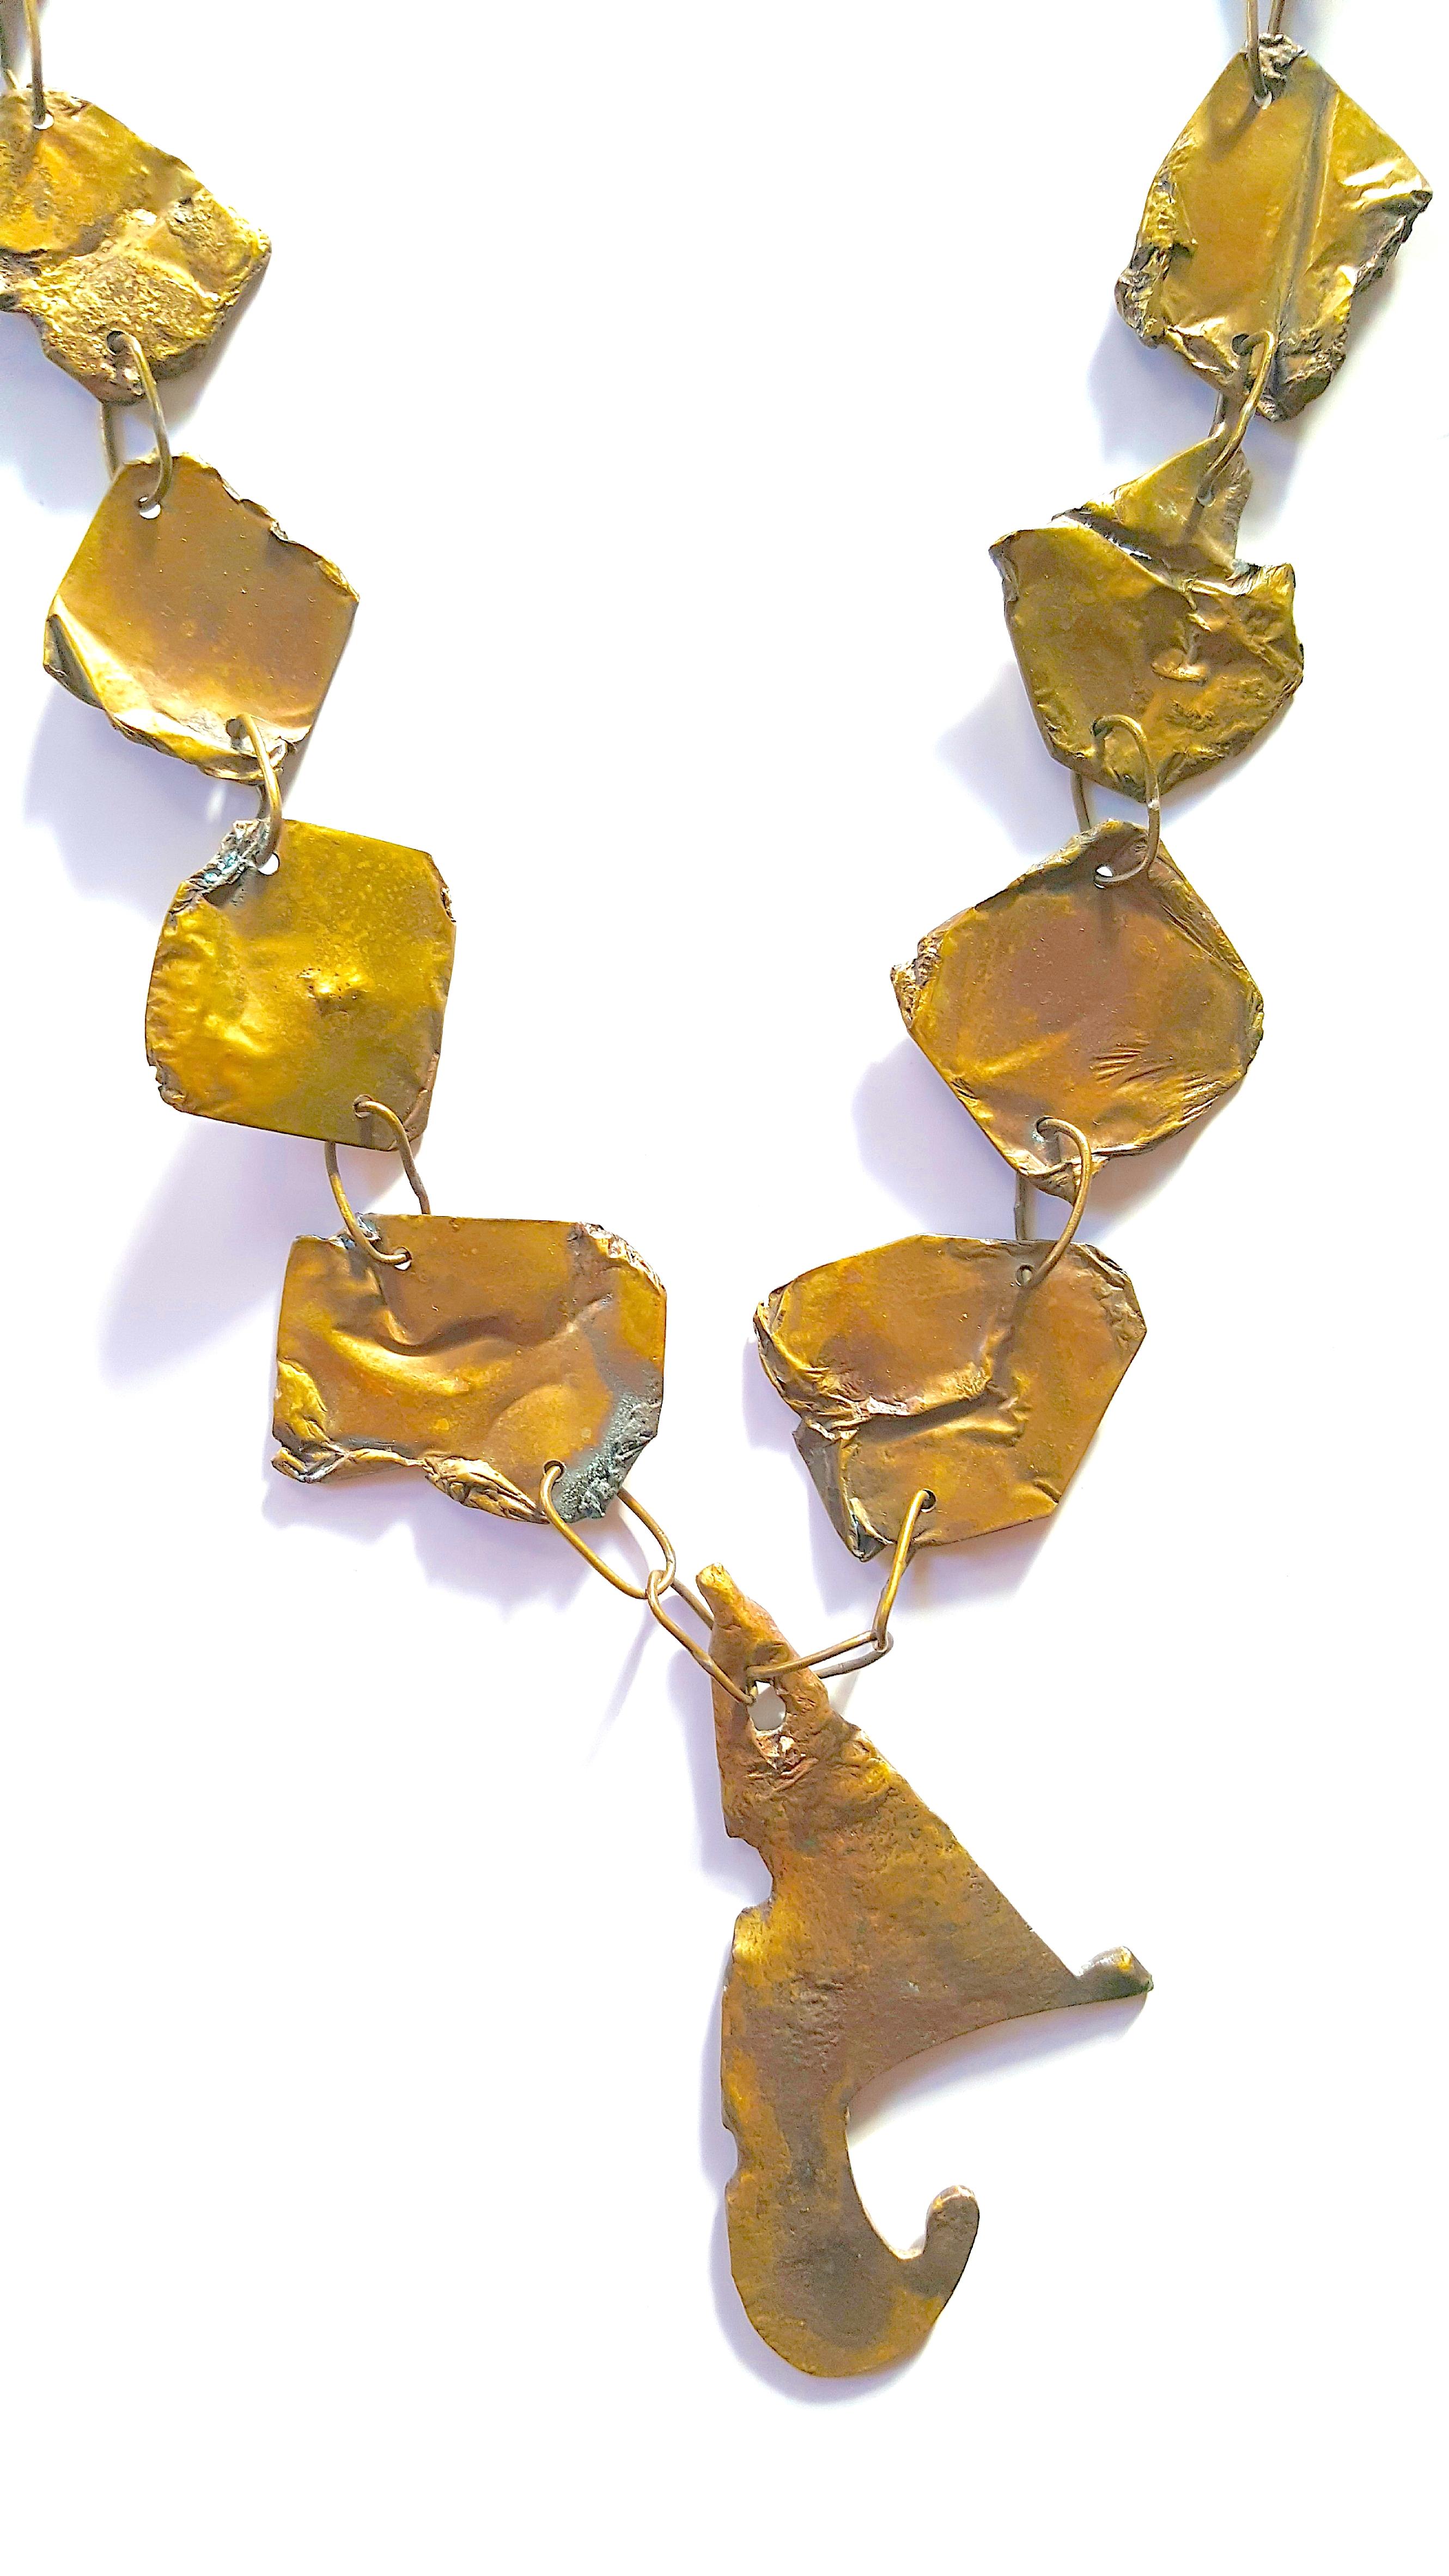 Artist 1980s NevelsonStyle Sculptural GiltMetal Crushed Jagged Pendant Necklace In Good Condition For Sale In Chicago, IL